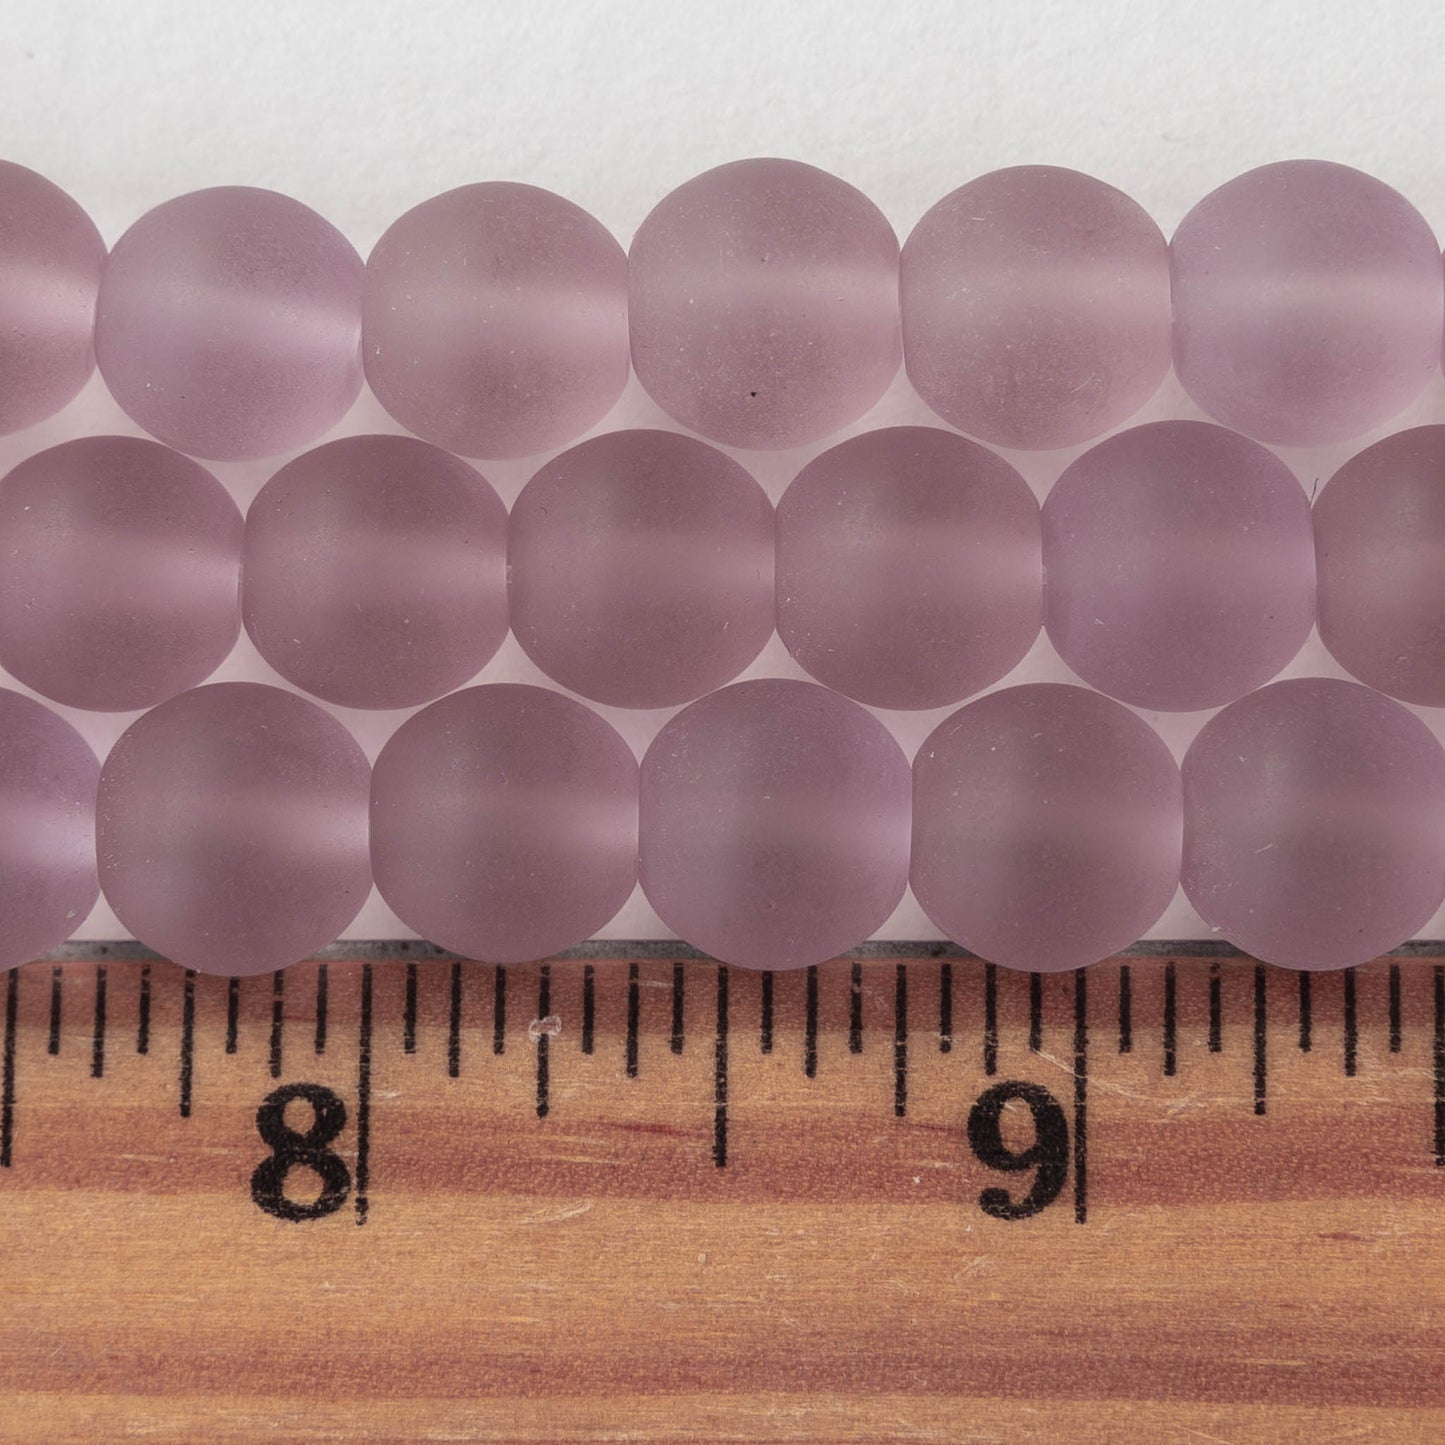 10mm Frosted Glass Rounds - Lt. Amethyst Purple - 8 Inches